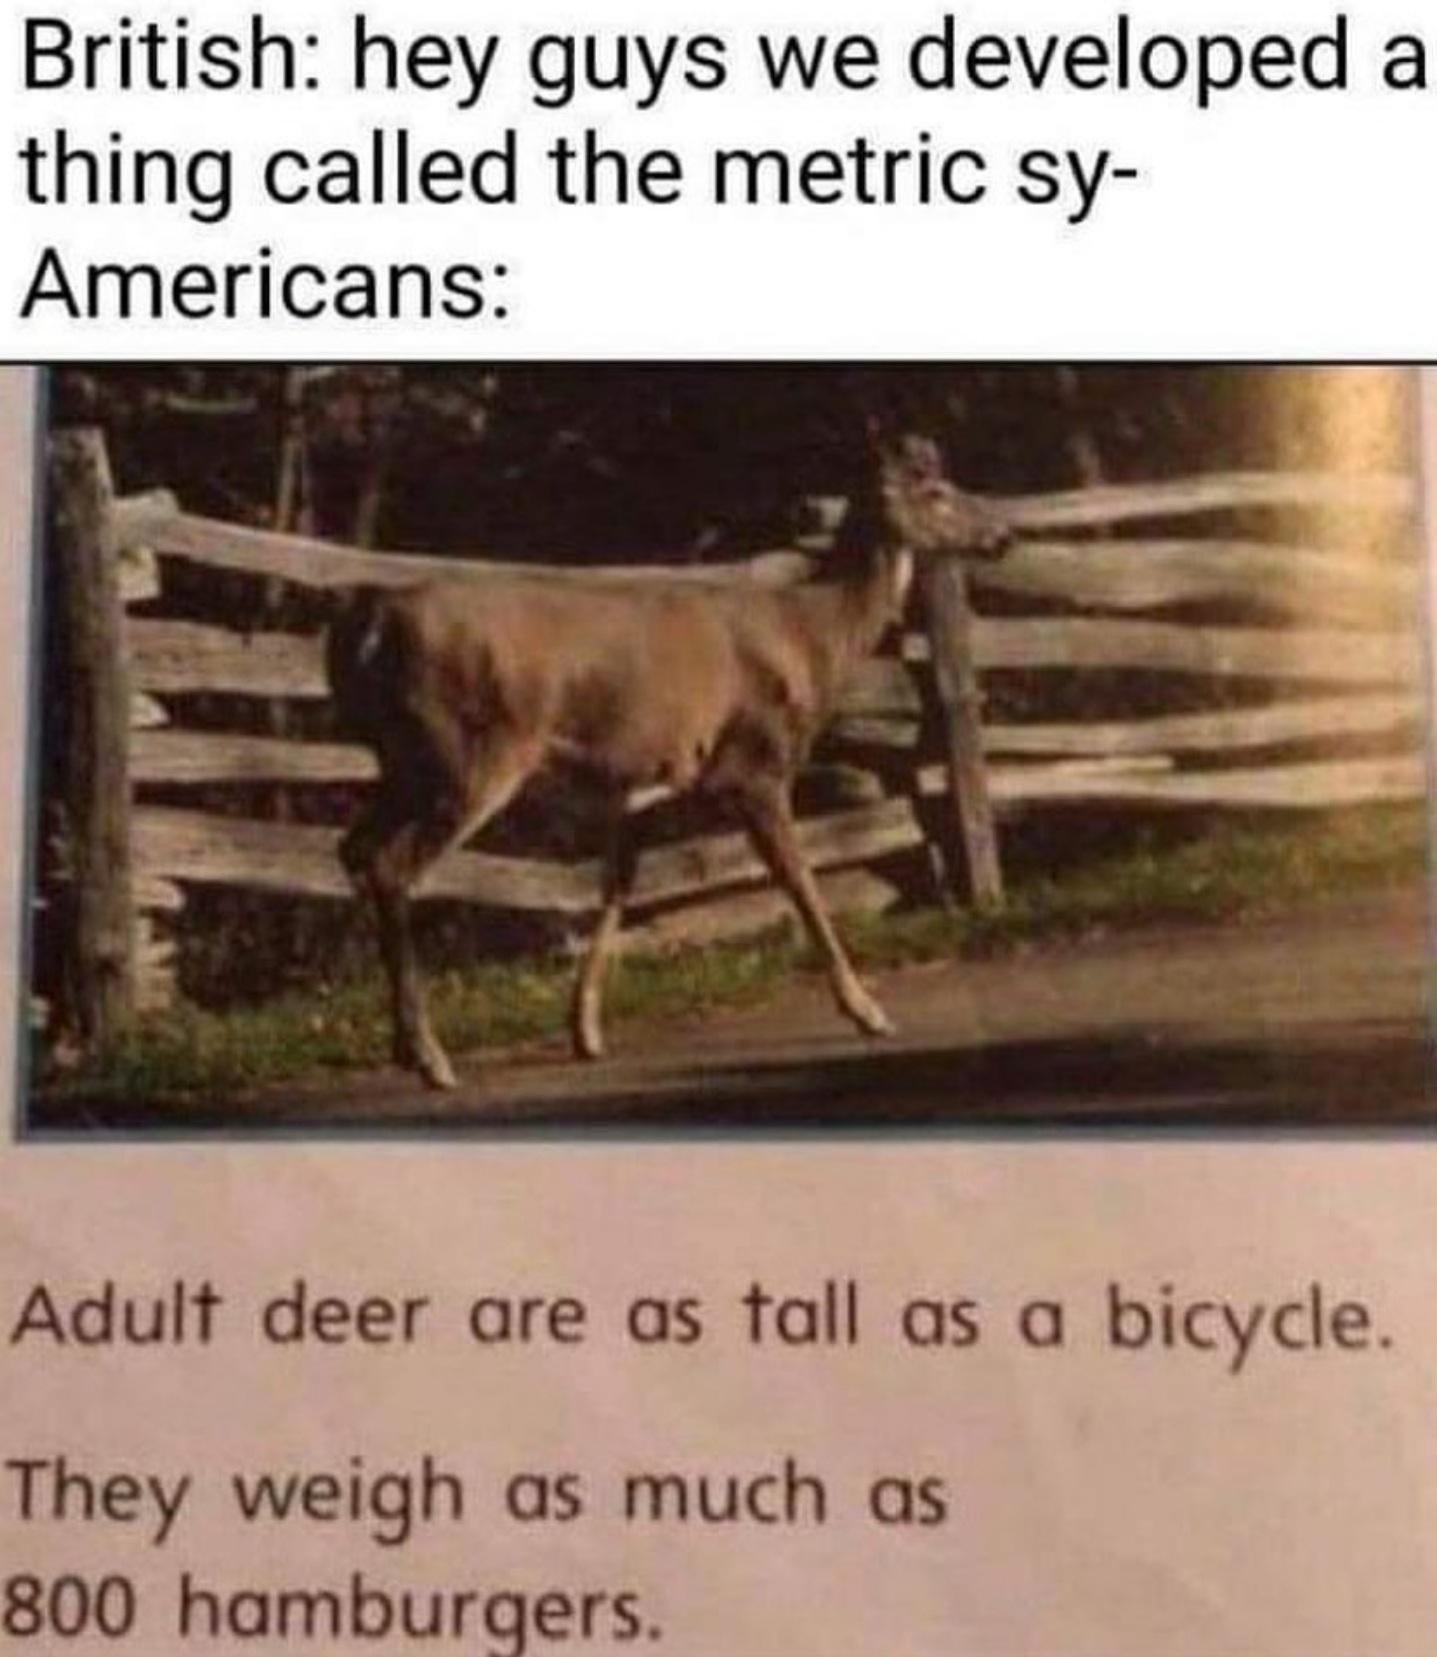 americans will use anything but the metric system - British hey guys we developed a thing called the metric sy Americans Adult deer are as tall as a bicycle. They weigh as much as 800 hamburgers.